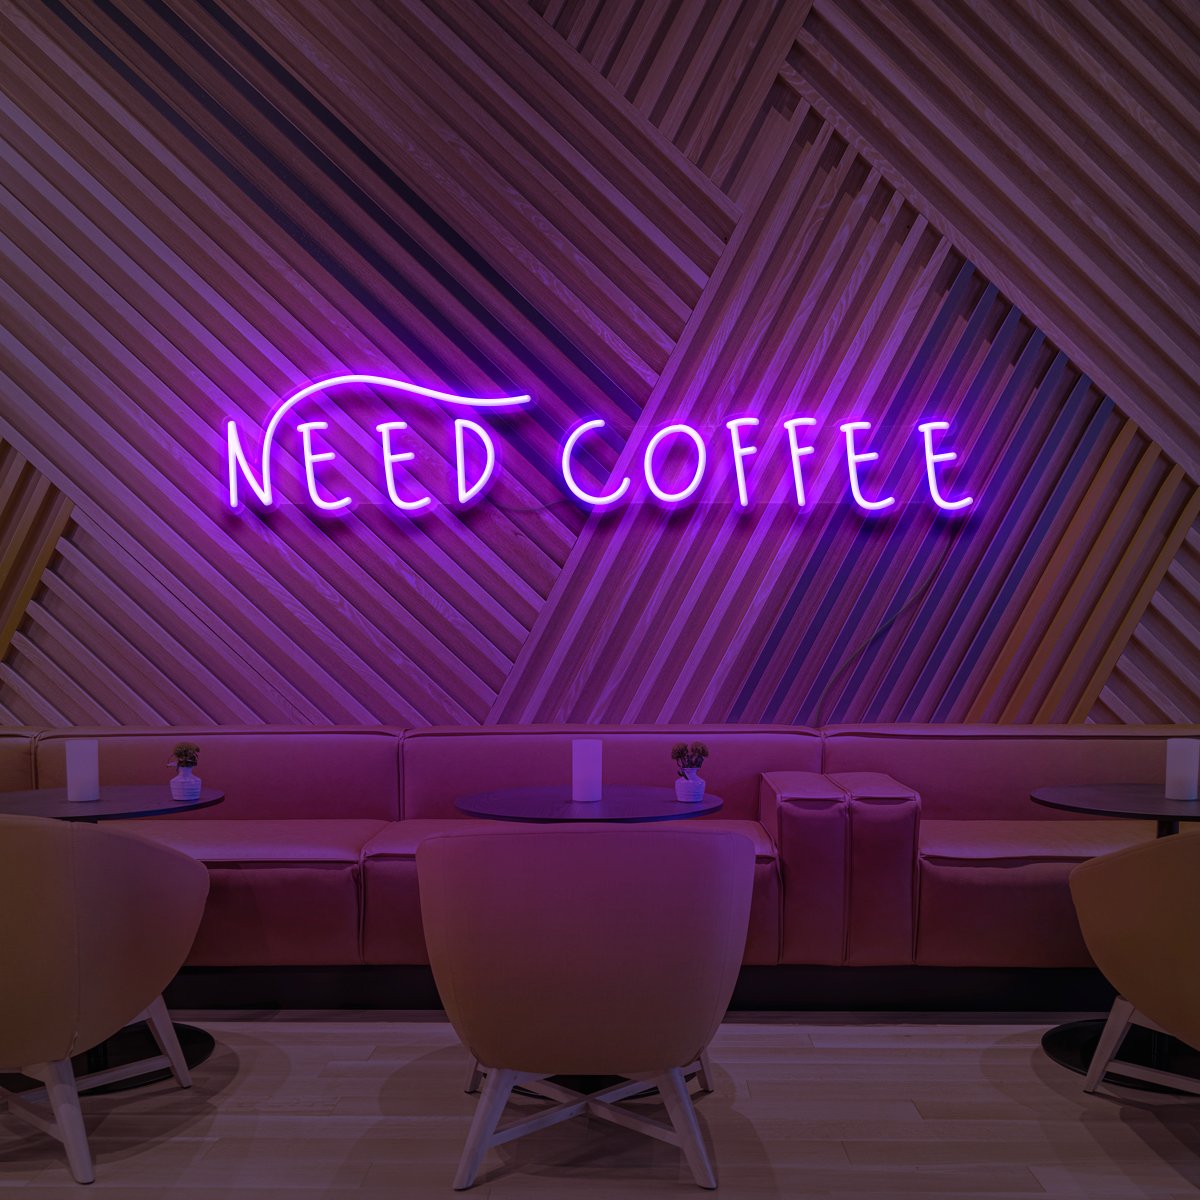 "Need Coffee" Neon Sign for Cafés 60cm (2ft) / Purple / LED Neon by Neon Icons